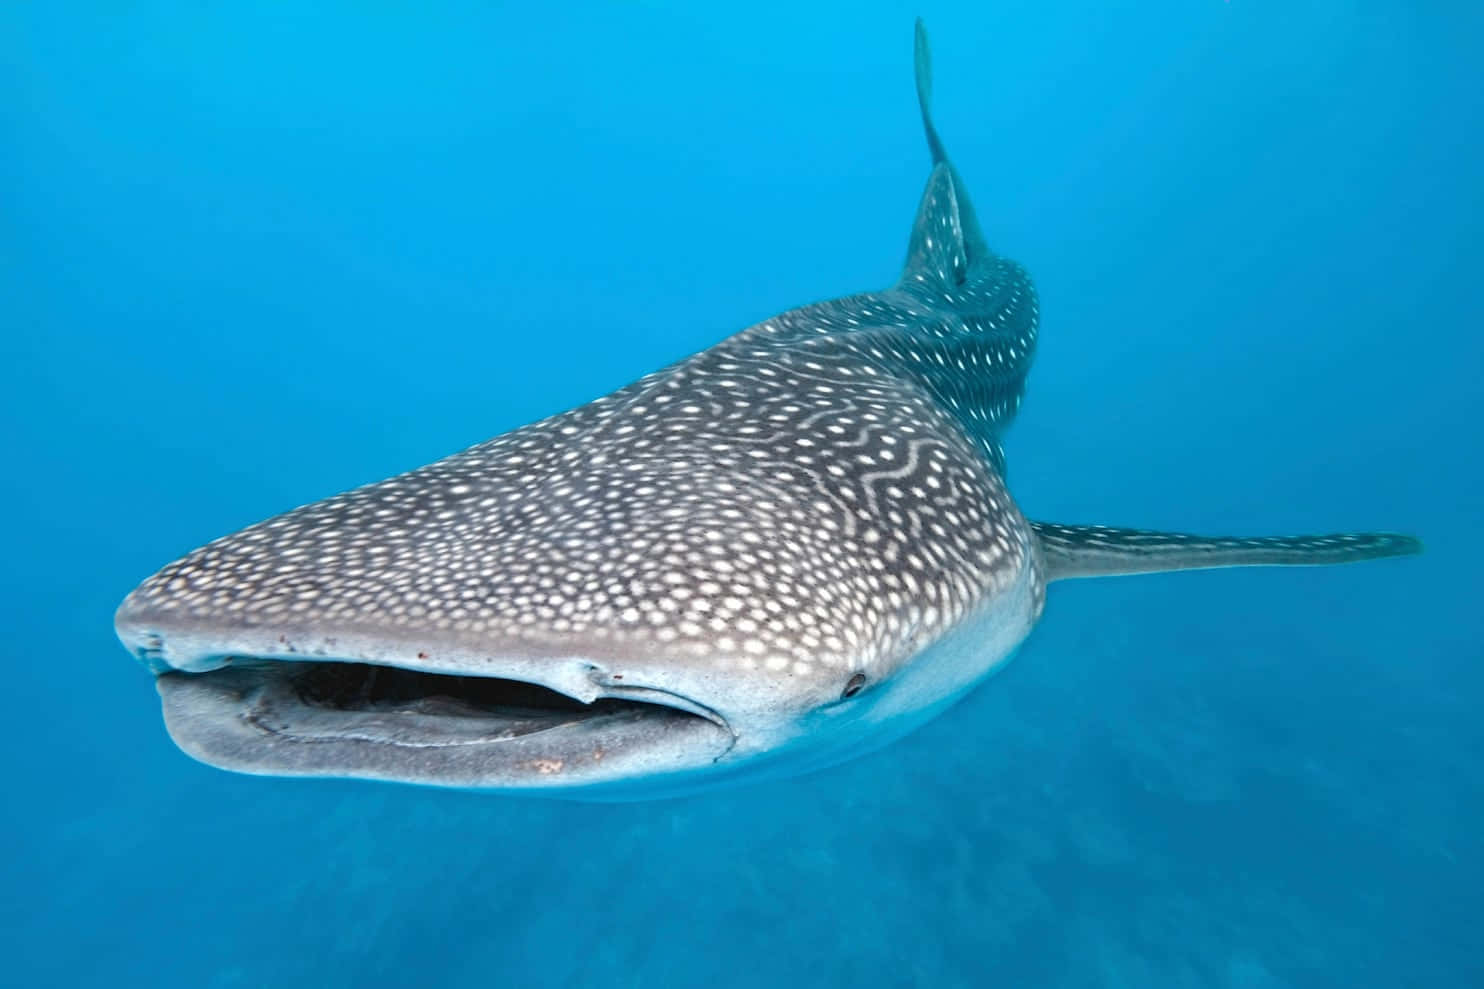 A majestic Whale Shark swimming among coral